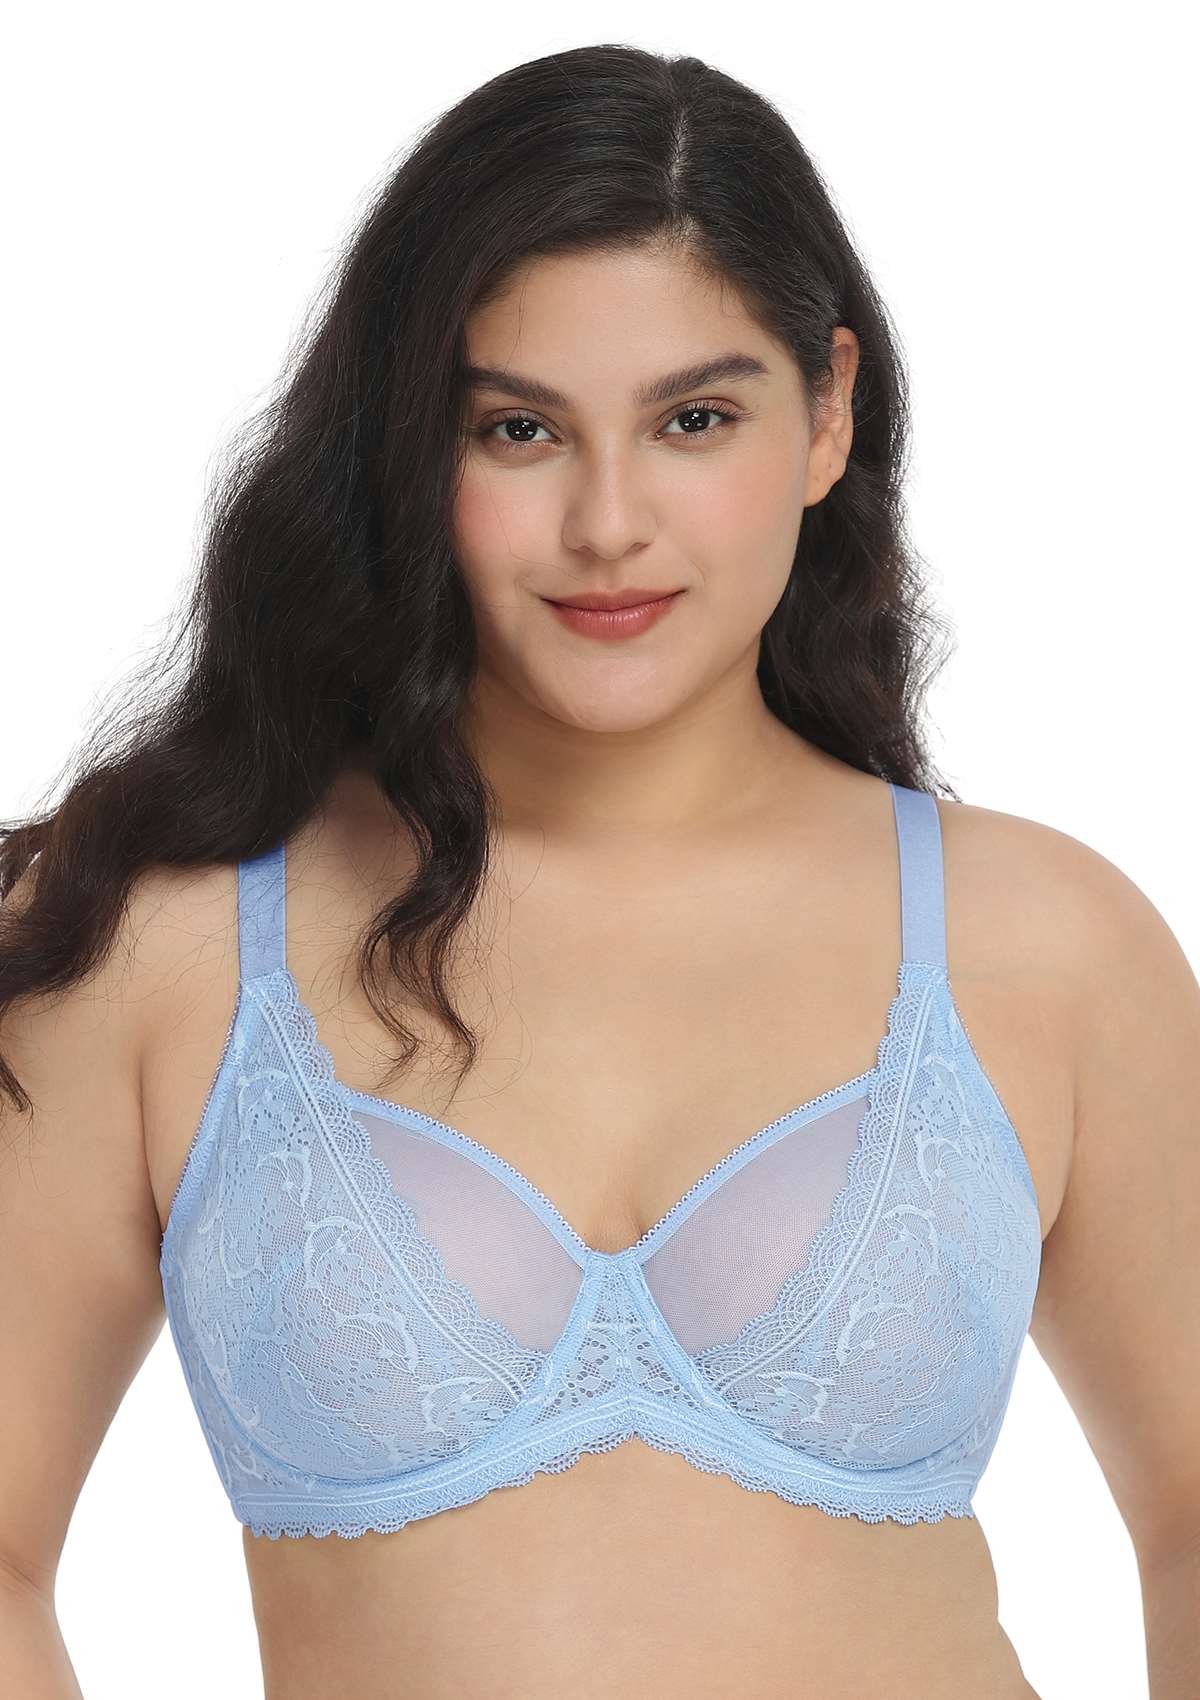 HSIA Anemone Big Bra: Best Bra For Lift And Support, Floral Bra - Light Blue / 38 / DD/E